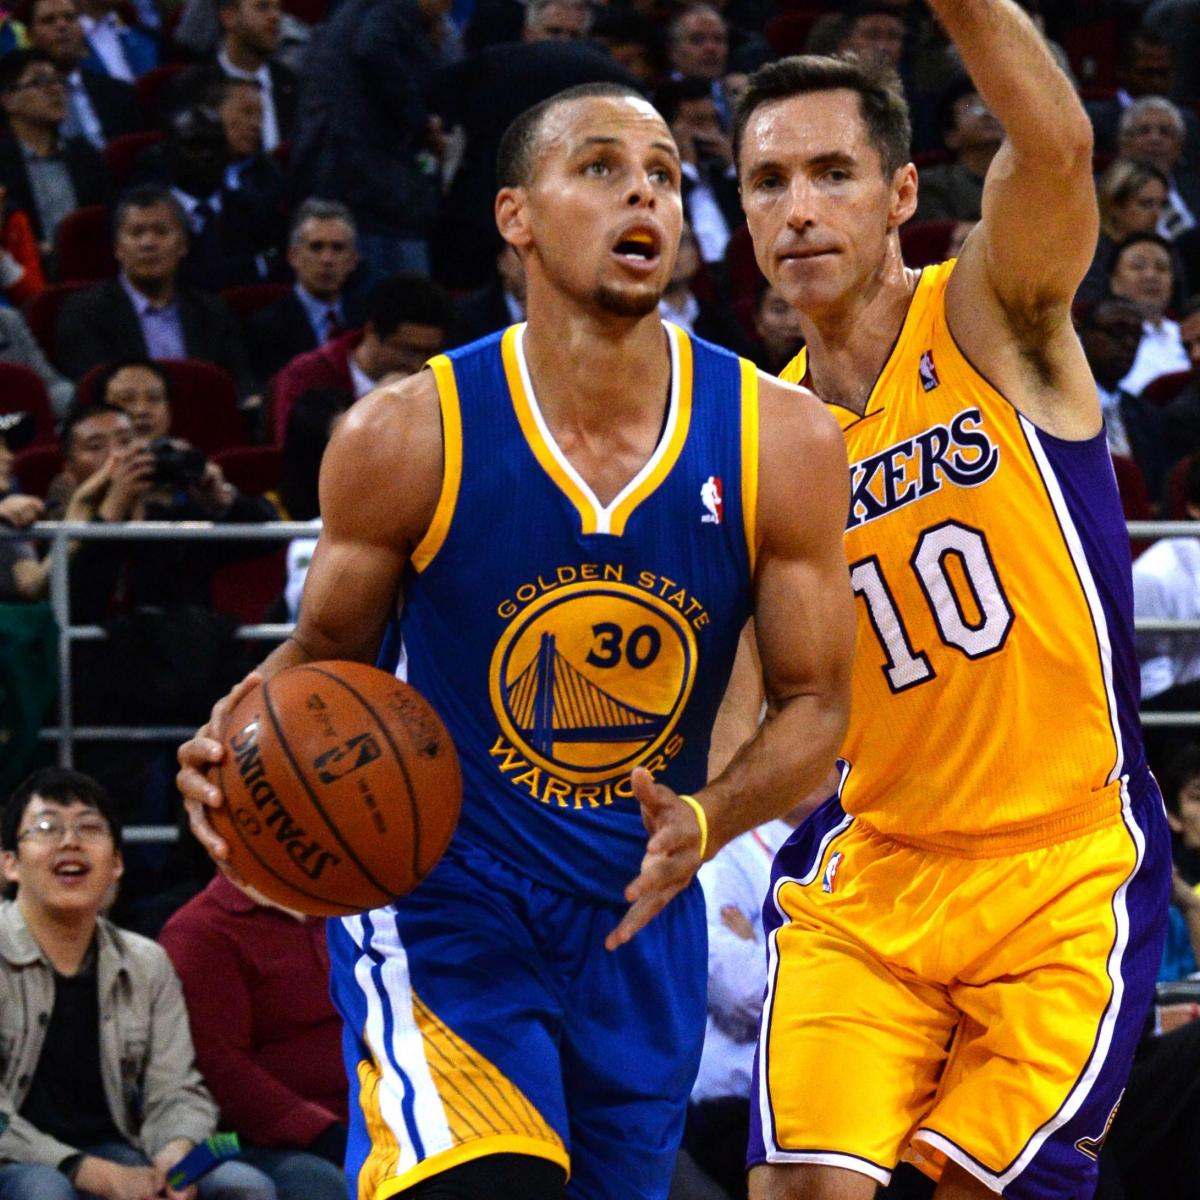 Steve Nash explains why Curry isn't considered great